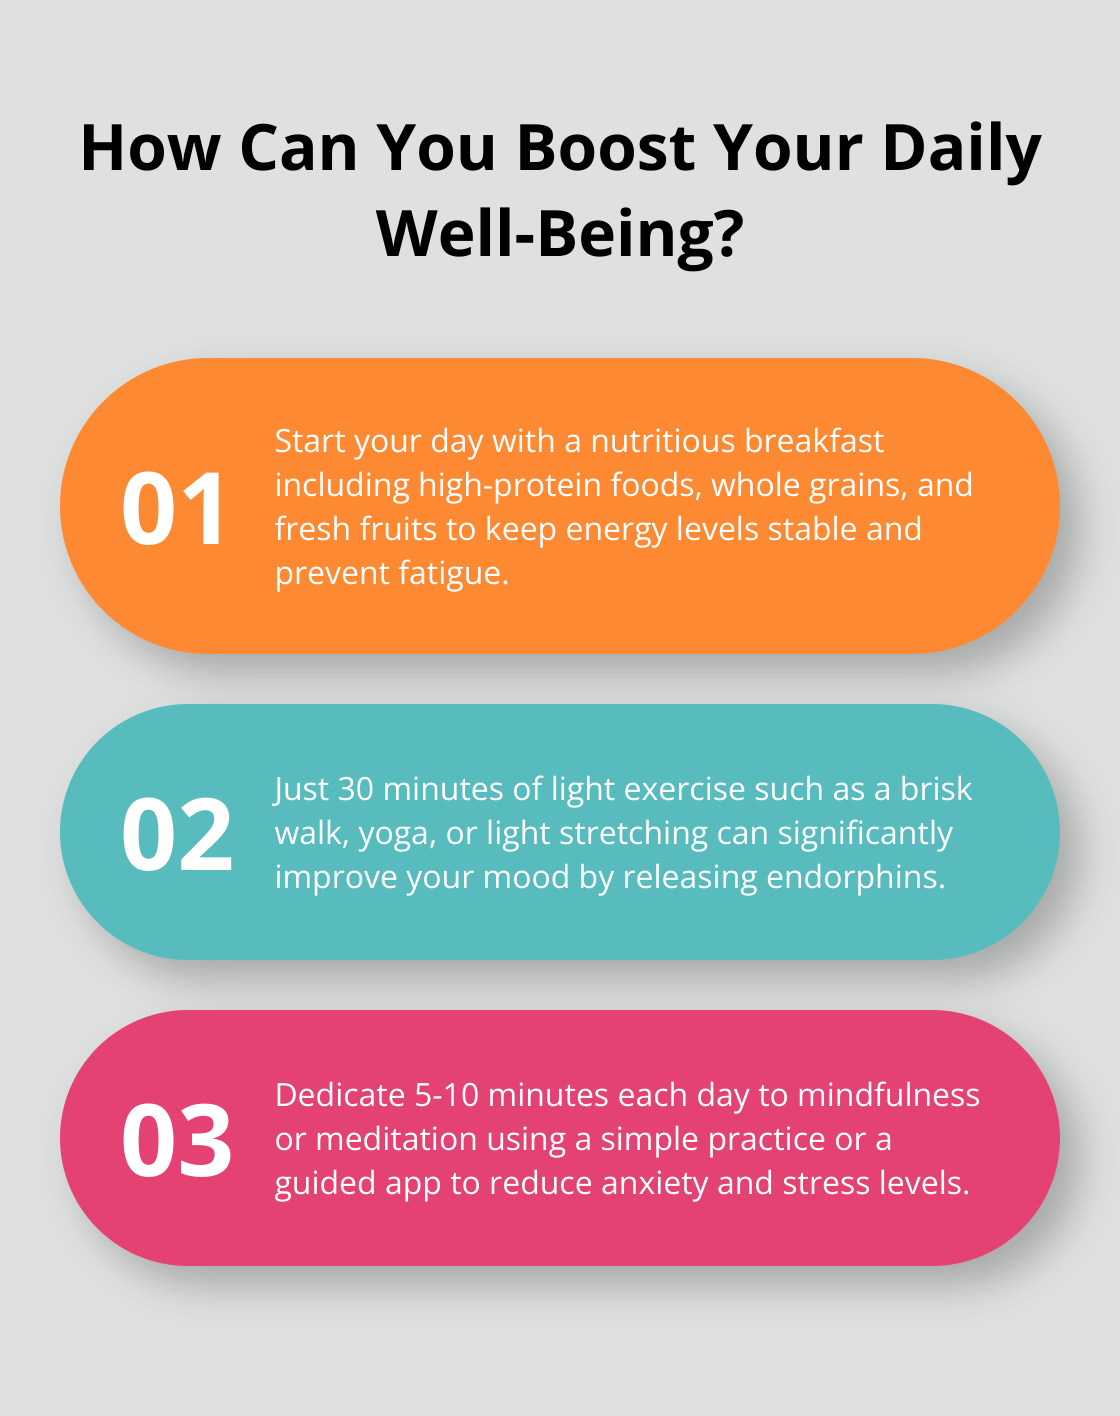 Fact - How Can You Boost Your Daily Well-Being?